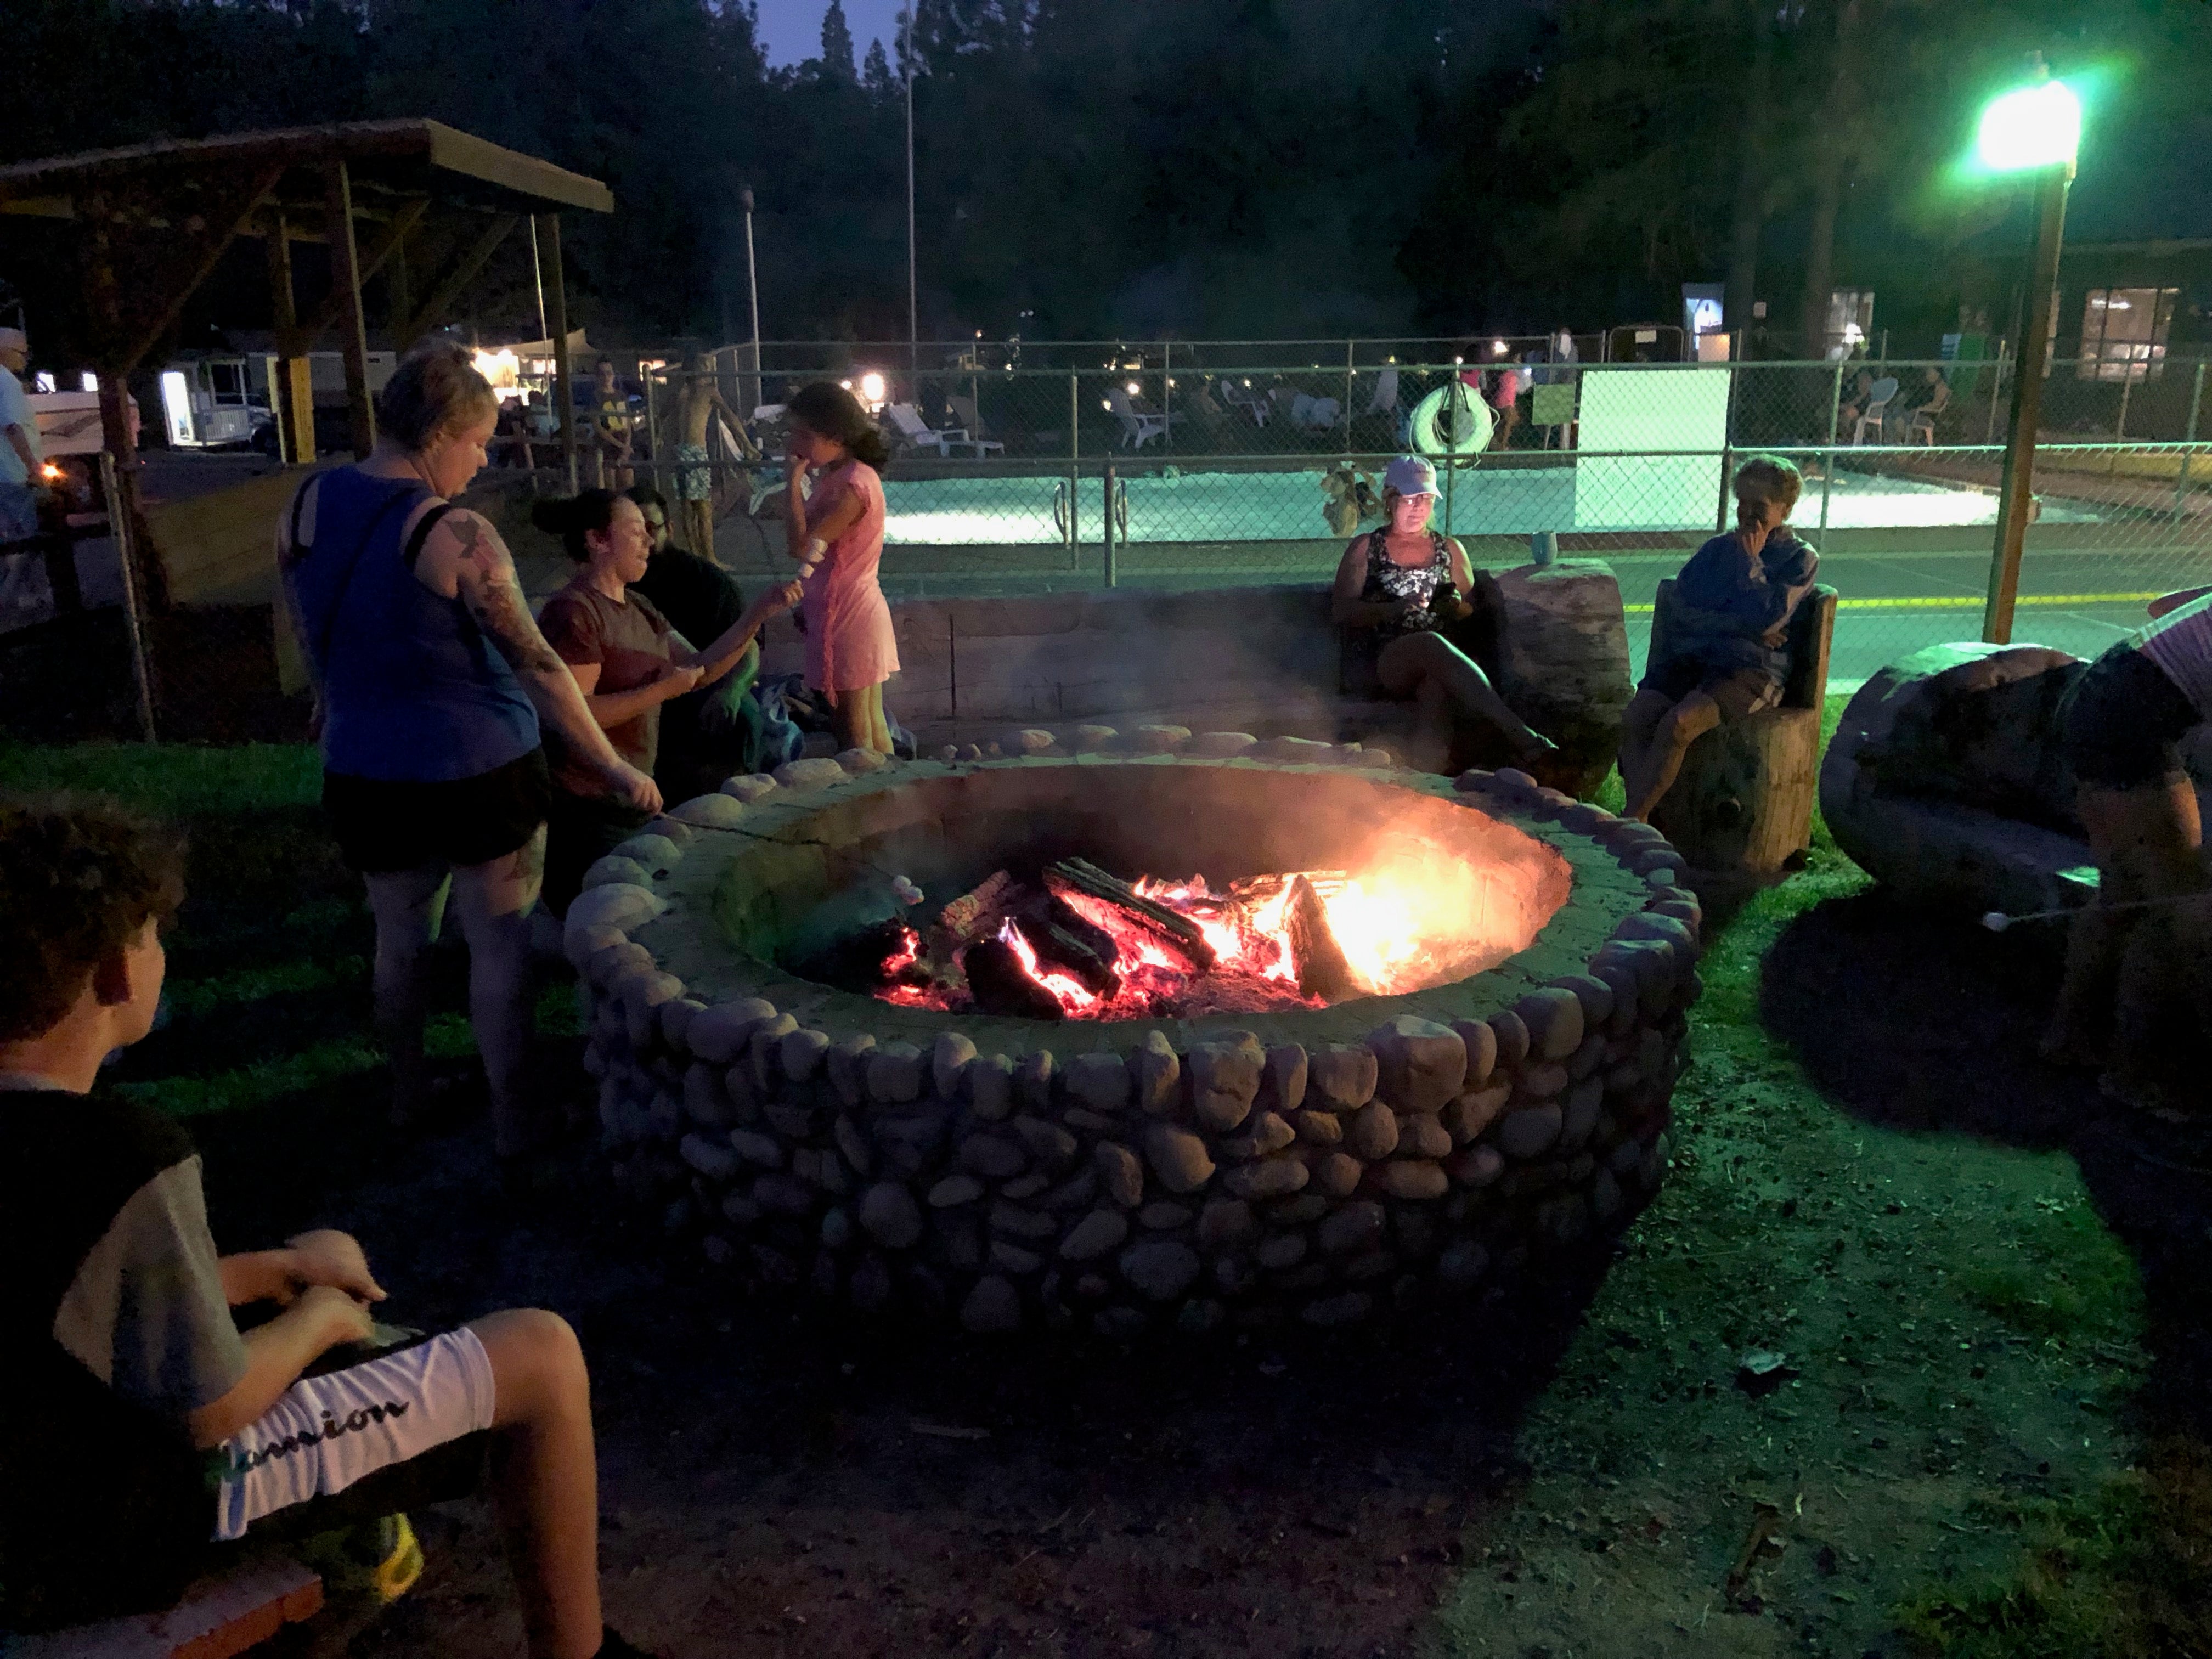 Campfire ring and pool "Downtown".